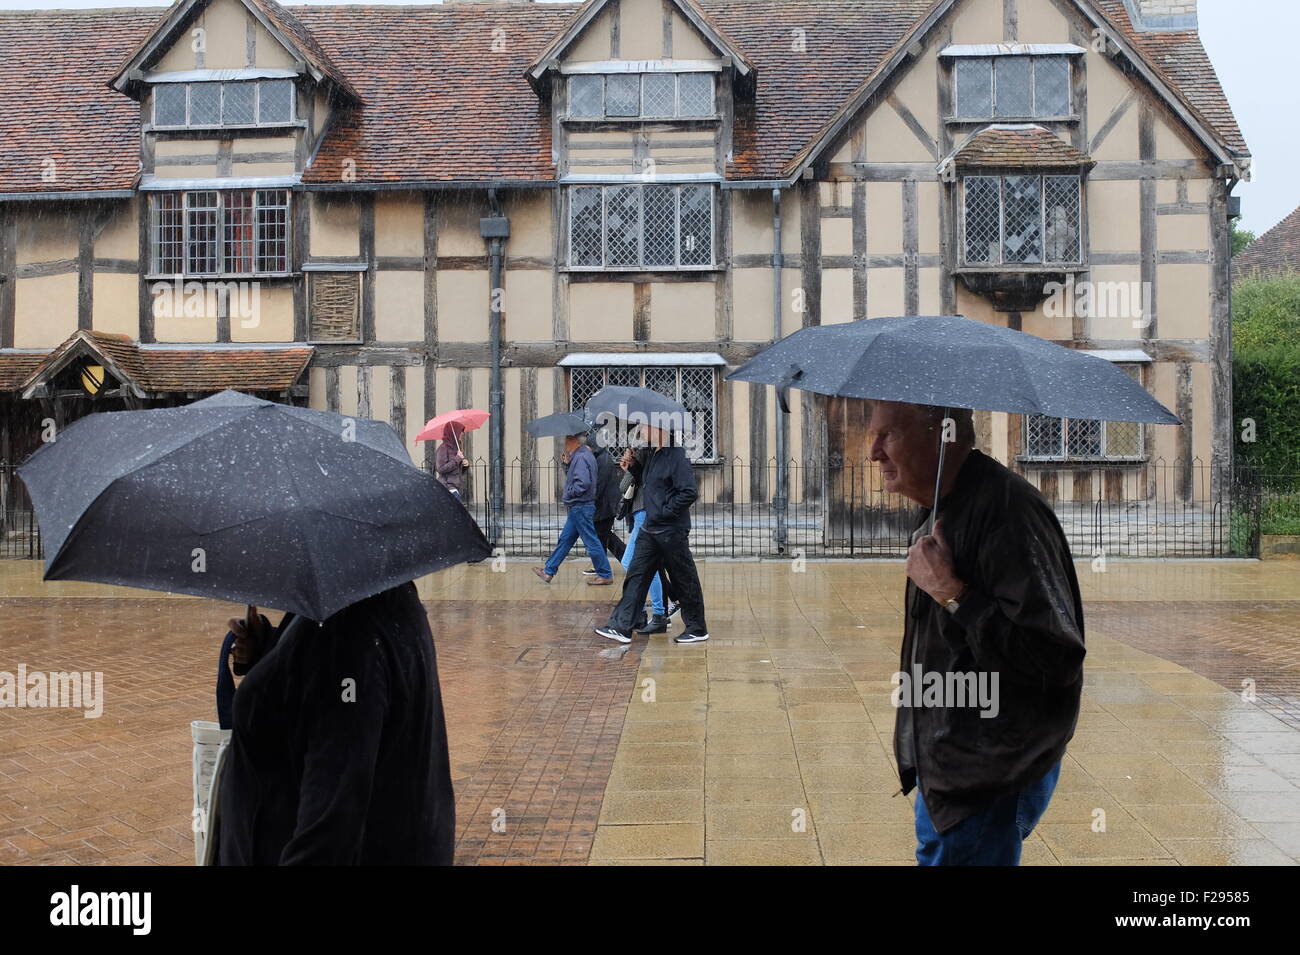 UK Weather. People get caught in heavy rain as they walk past Shakespeare's house in Stratford upon Avon: 14 September 2015.  Stock Photo